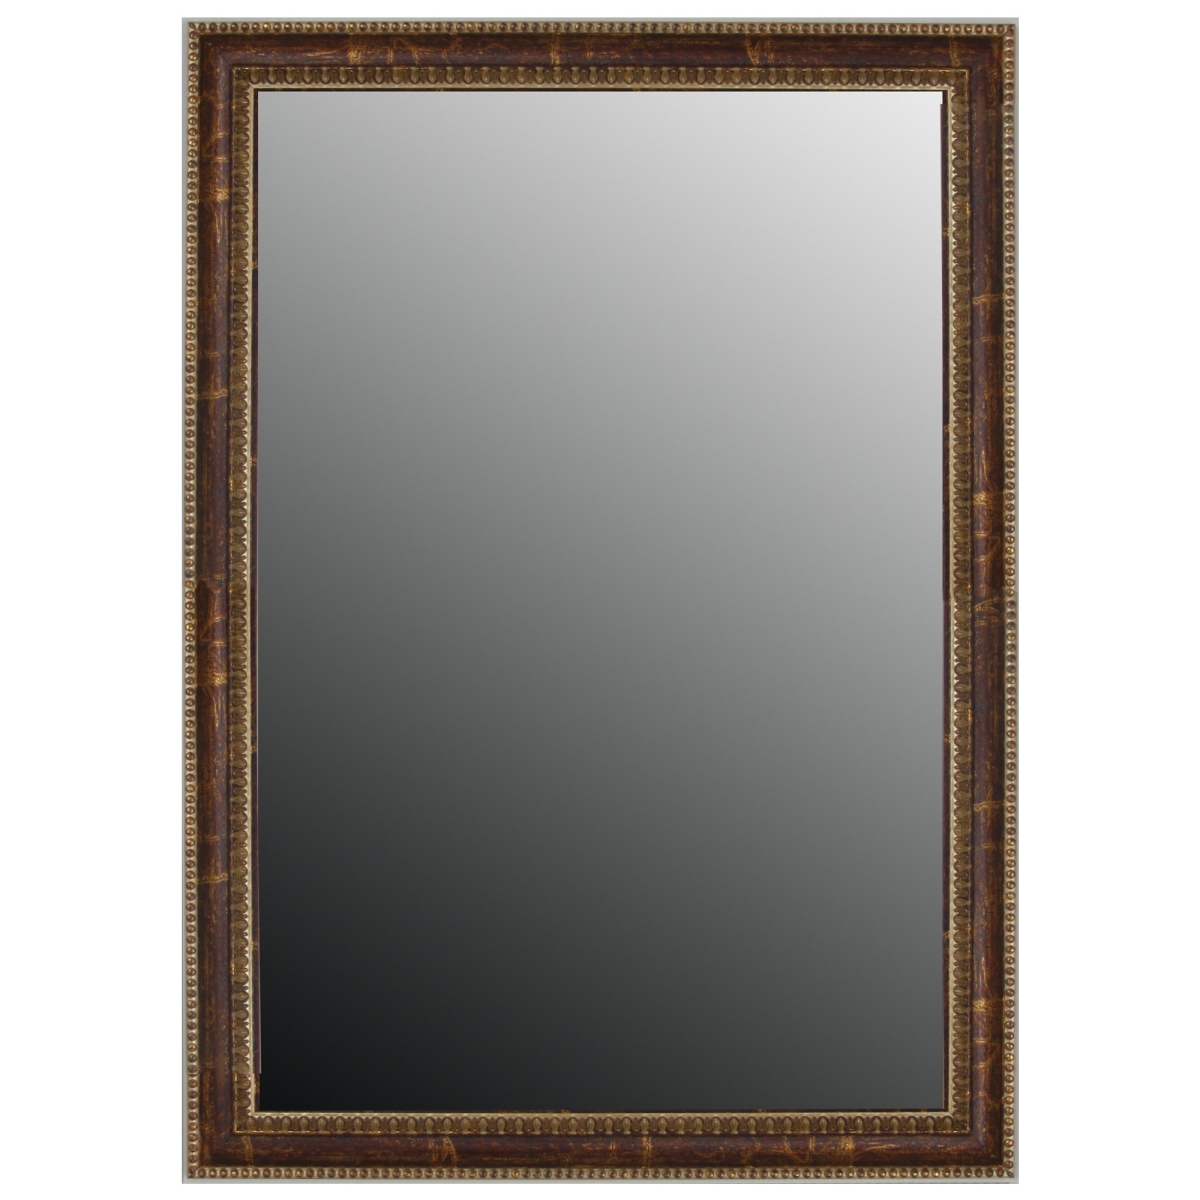 Hitchcock Butterfield 808803 Gold Georgian V Beaded Wall Mirror - 34.25 X 44.25 In.